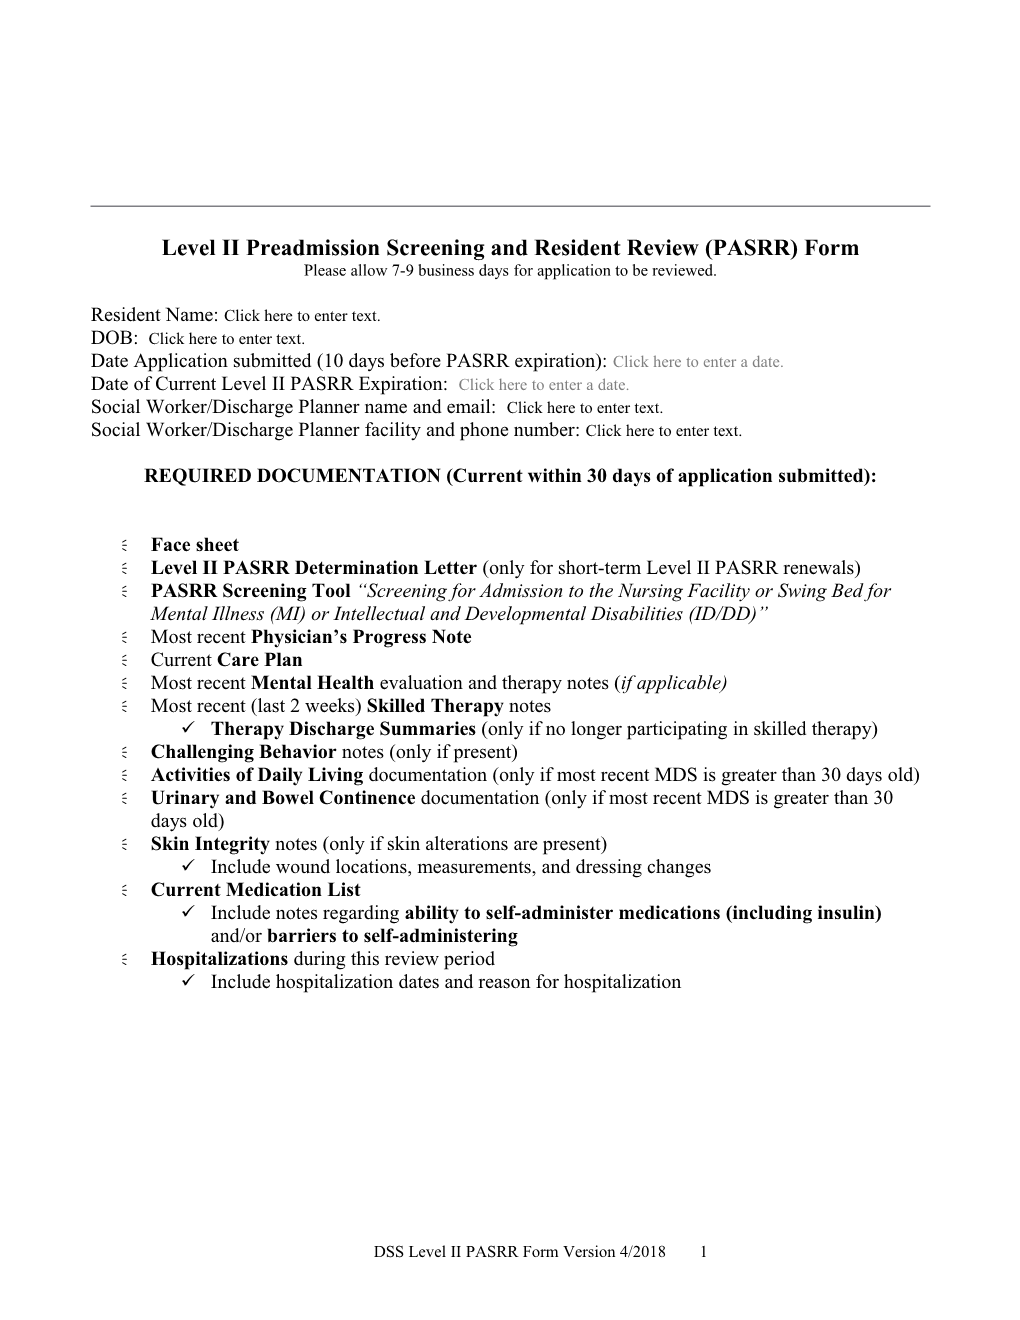 Level II Preadmission Screening and Resident Review (PASRR) Form